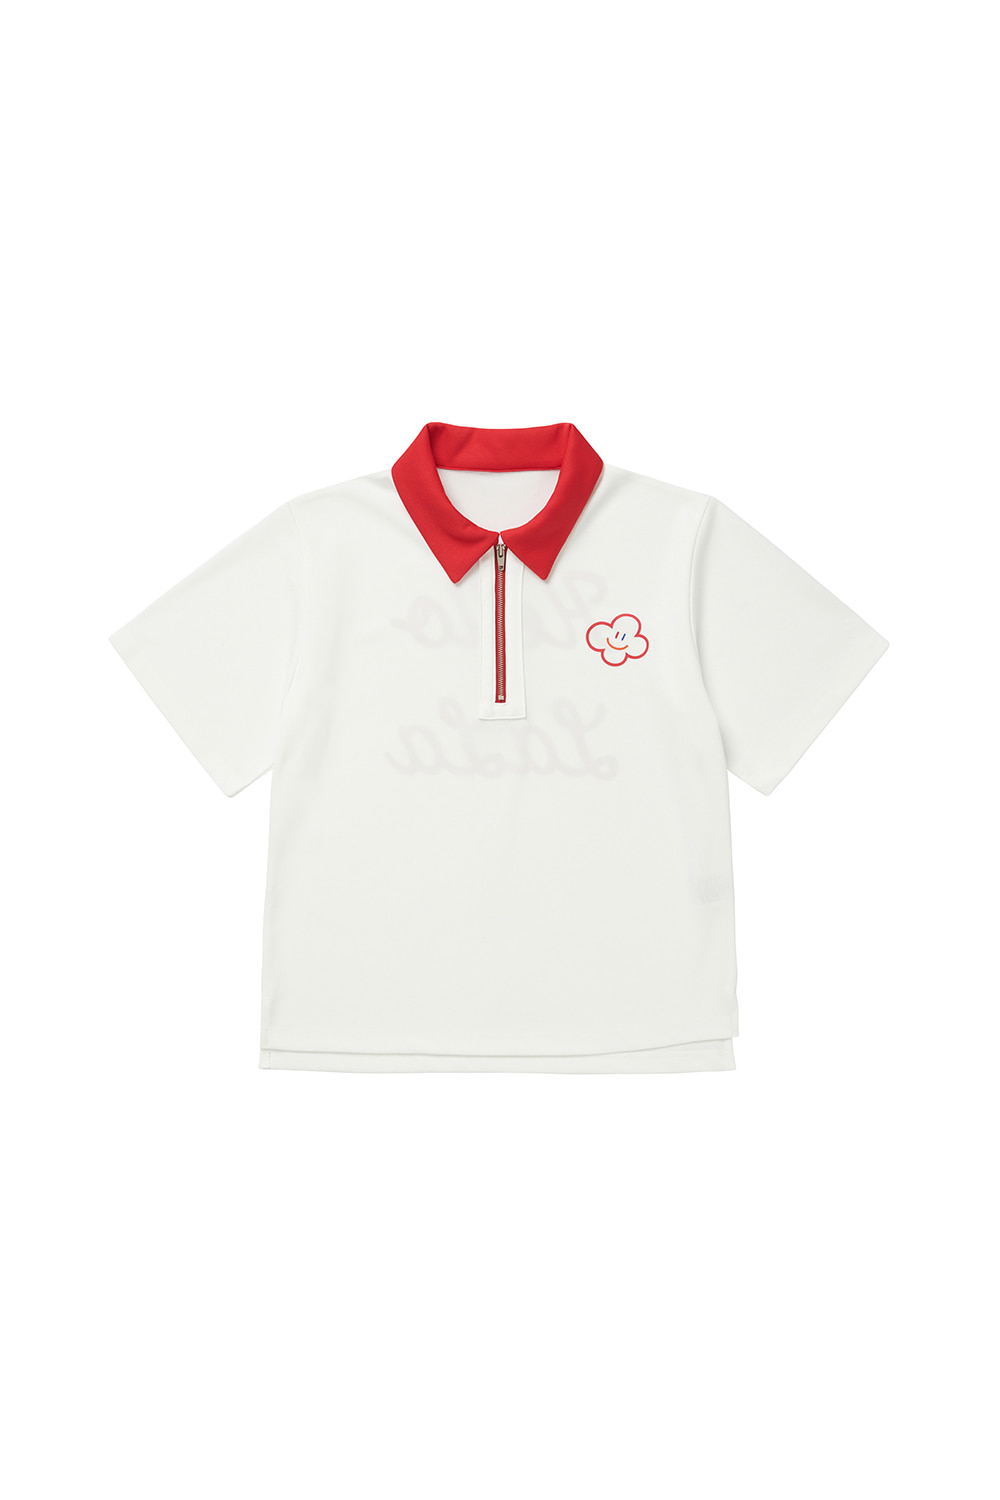 Hello LaLa Zip Up T-Shirts [Red PK White]